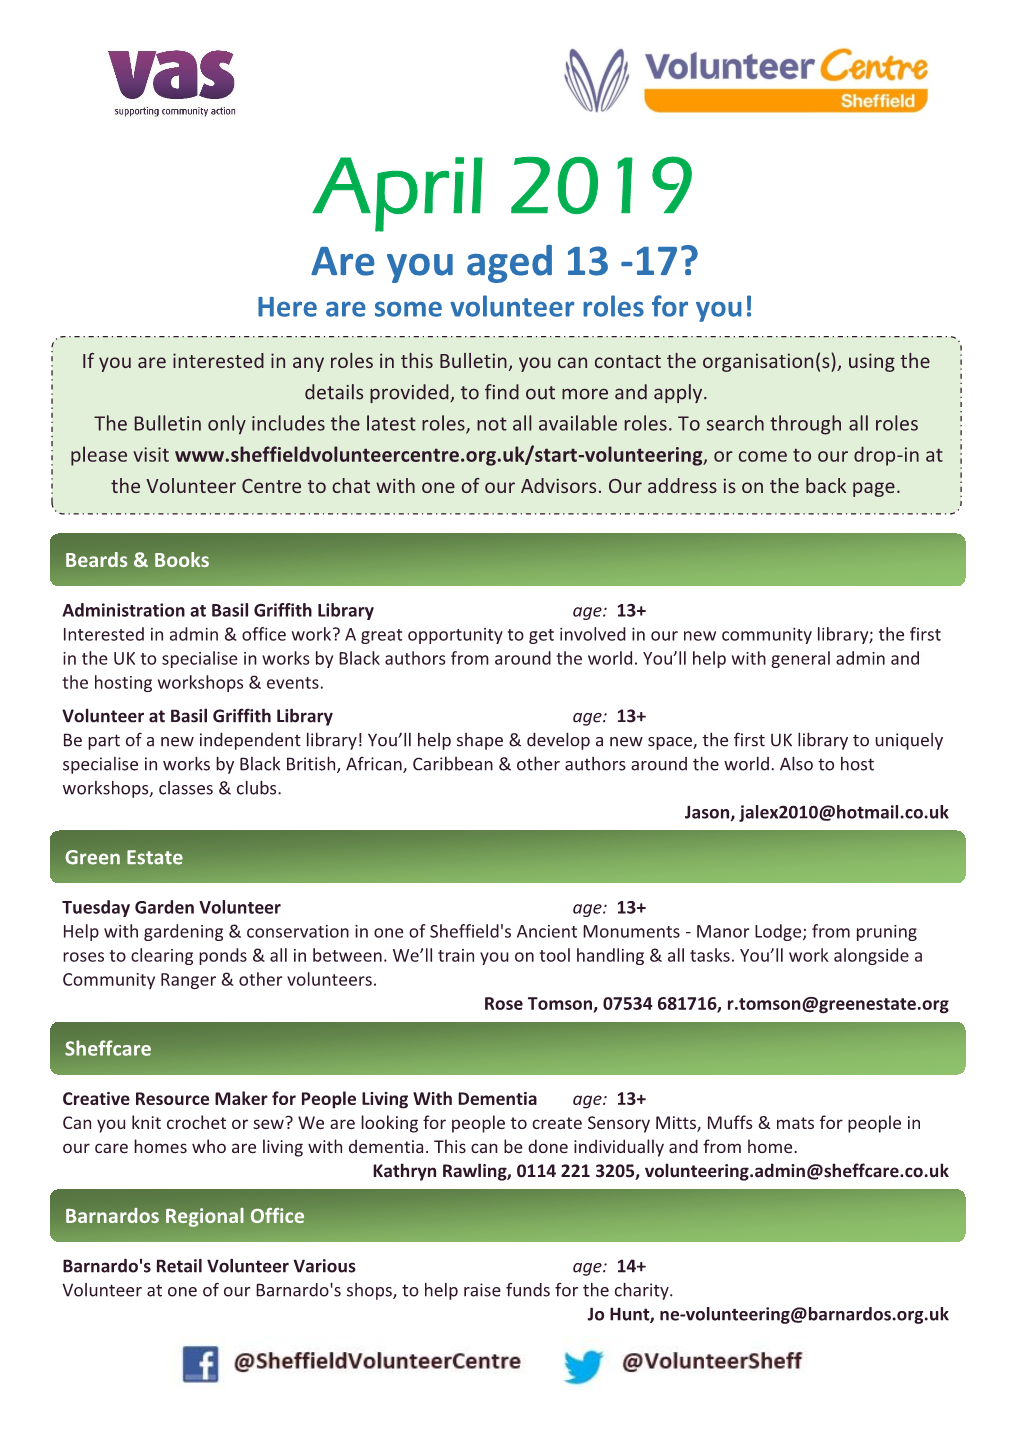 April 2019 Are You Aged 13 -17? Here Are Some Volunteer Roles for You!